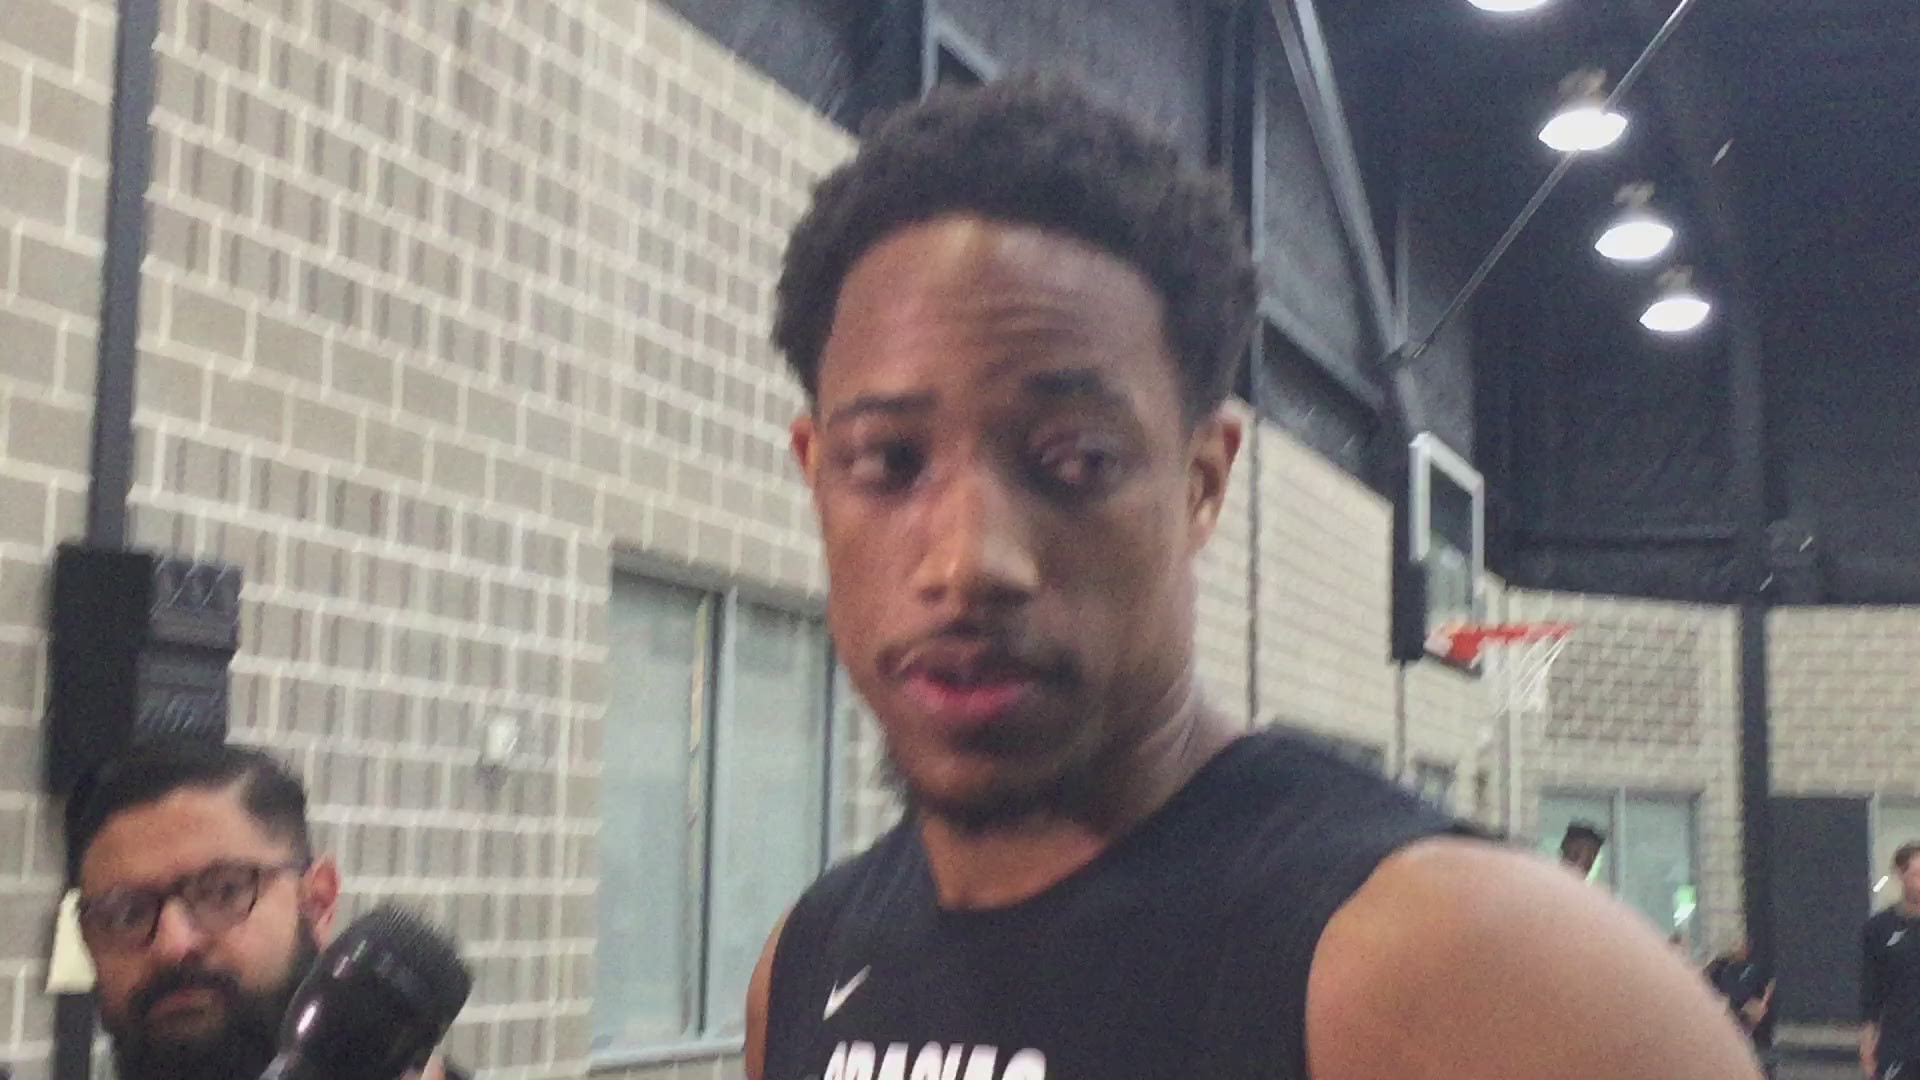 Spurs guard DeMar DeRozan talks about Game 4 and looks ahead to Game 5